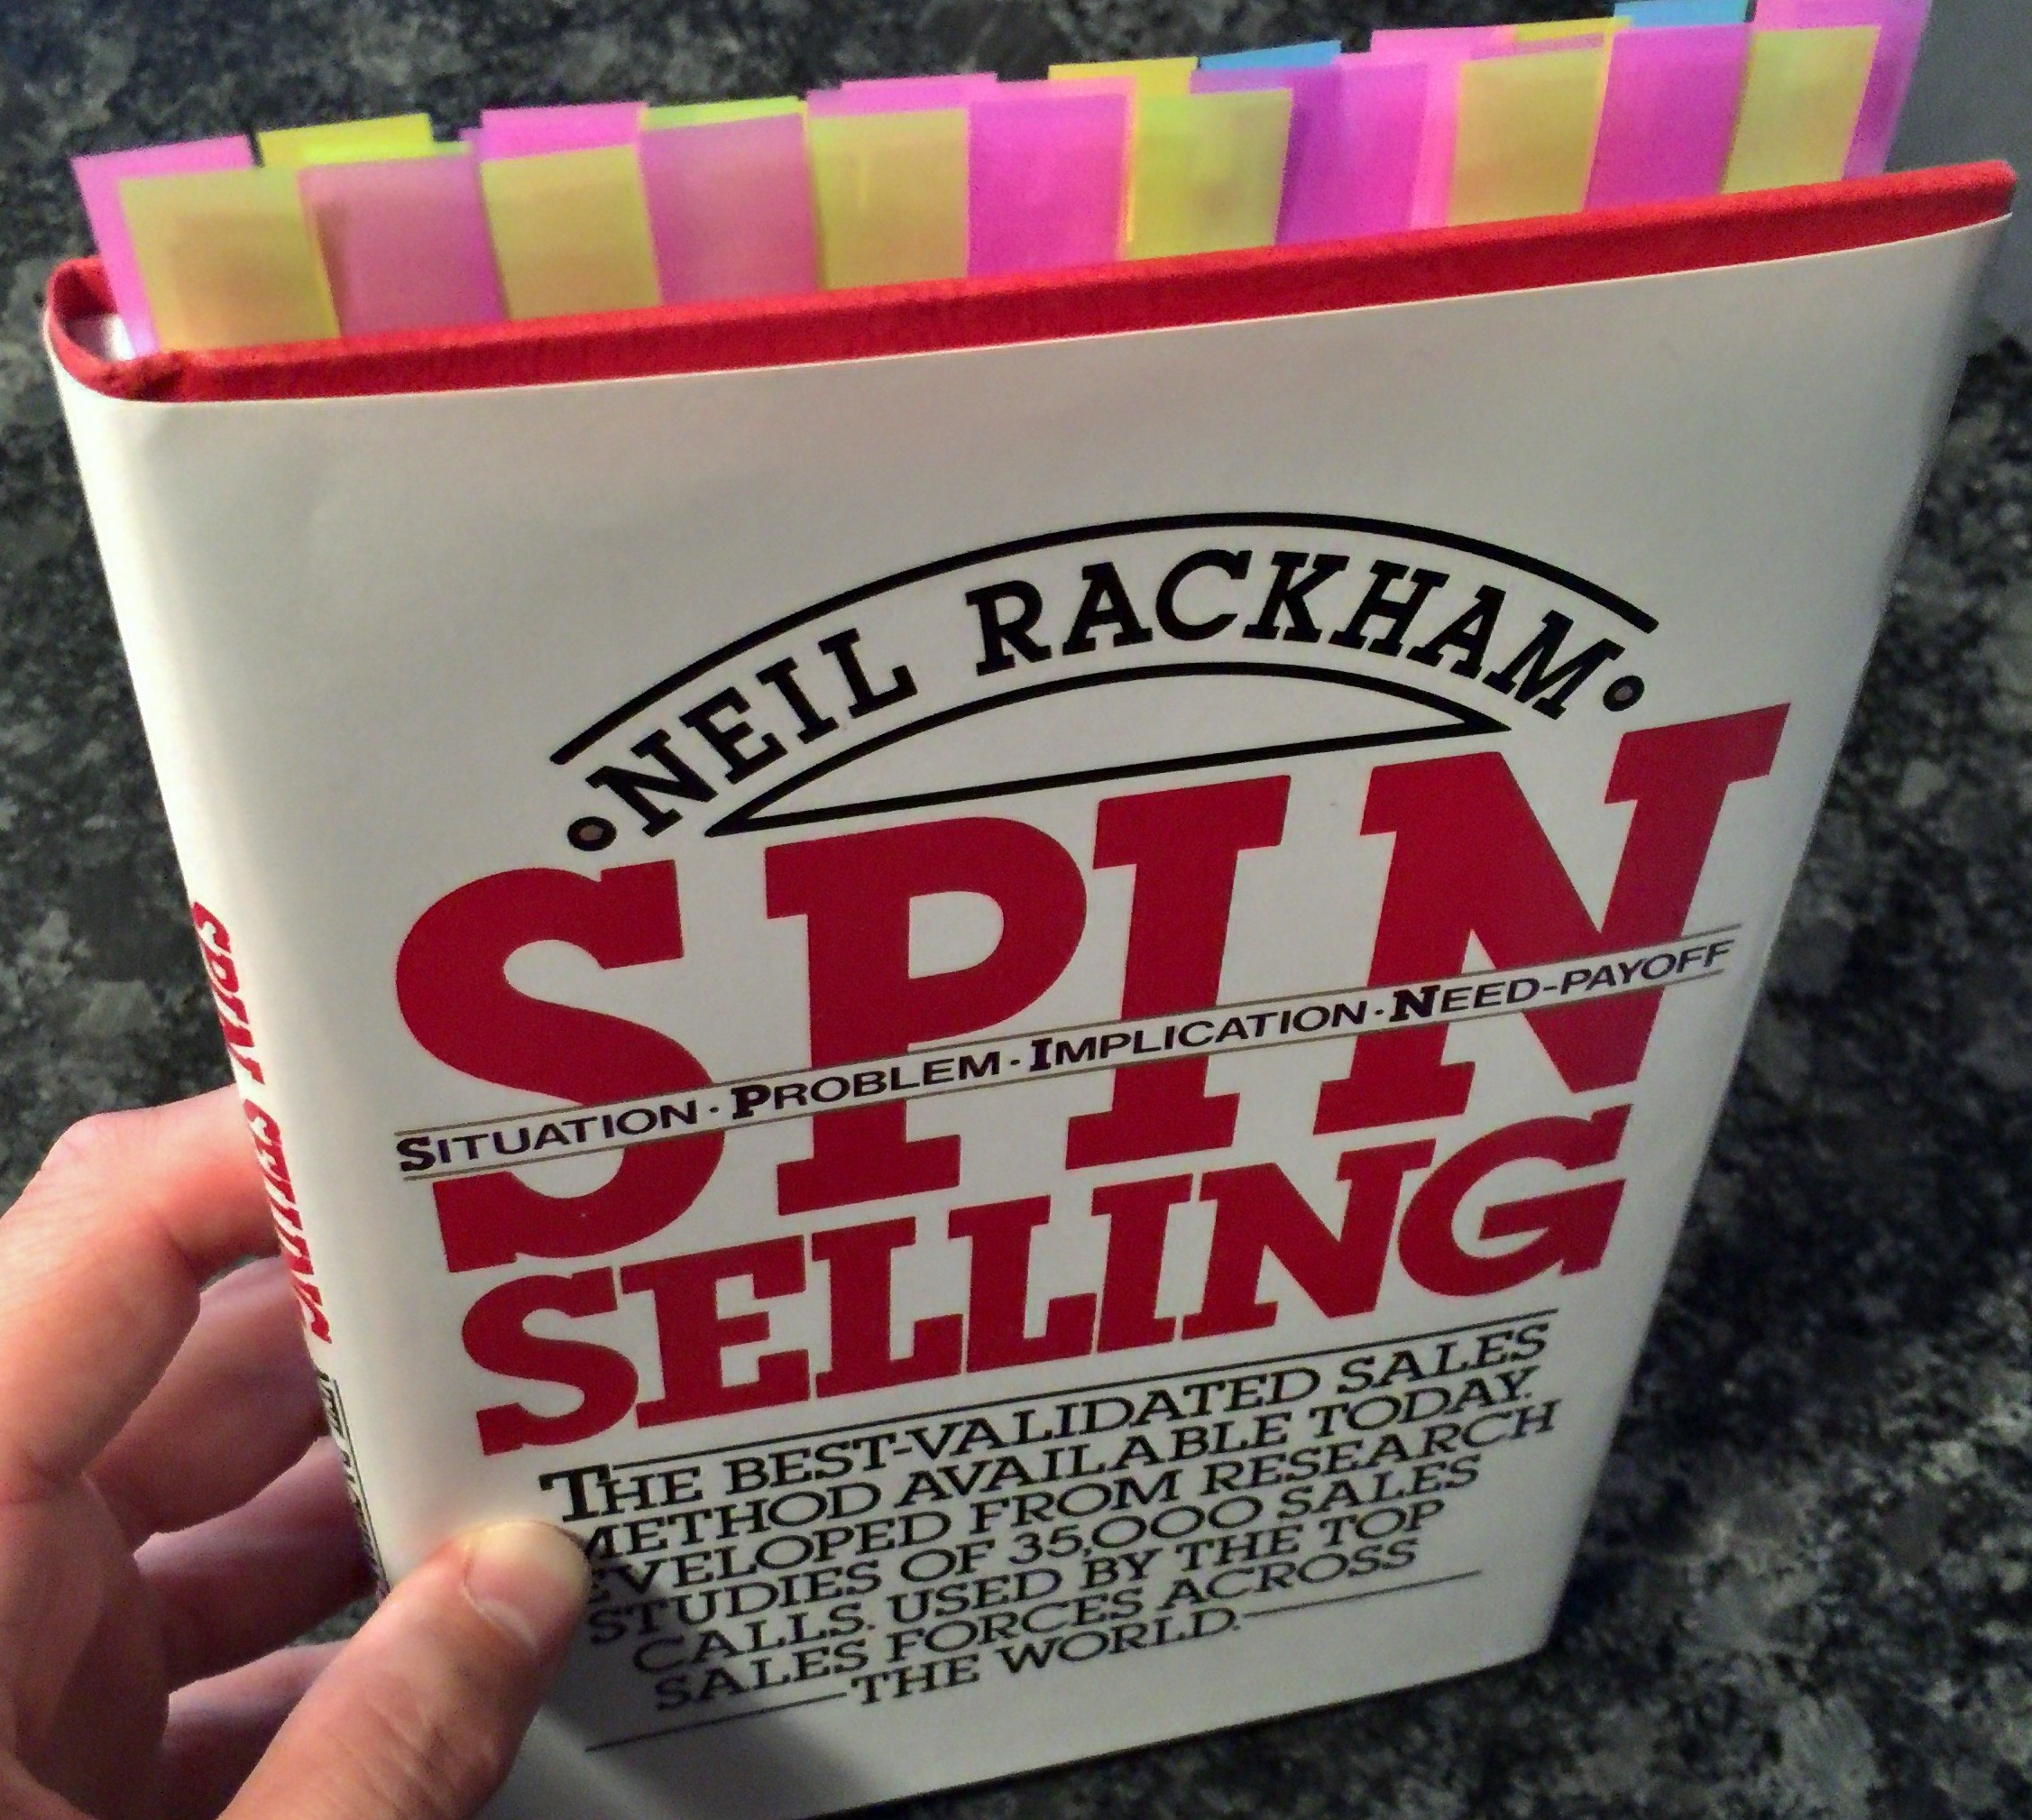 Neil Rackham (SPIN Selling - The Large Sale) 2 CDs MP3